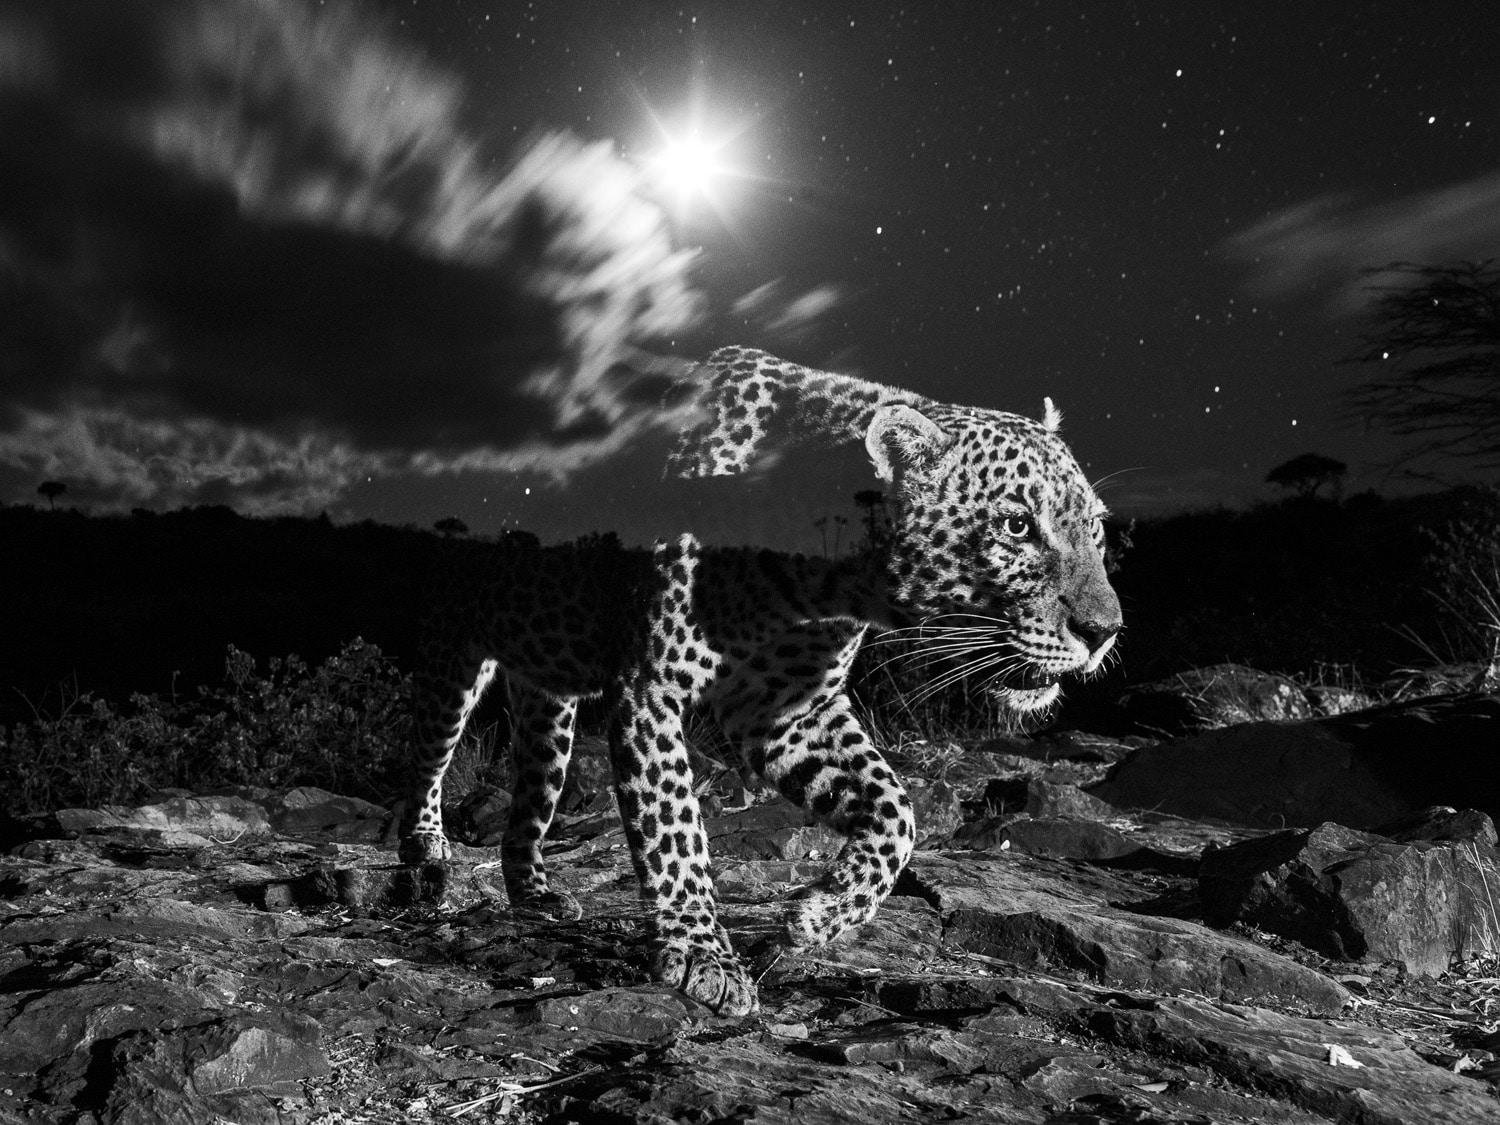 Leopard Photographed at Night in Kenya with Camtraption